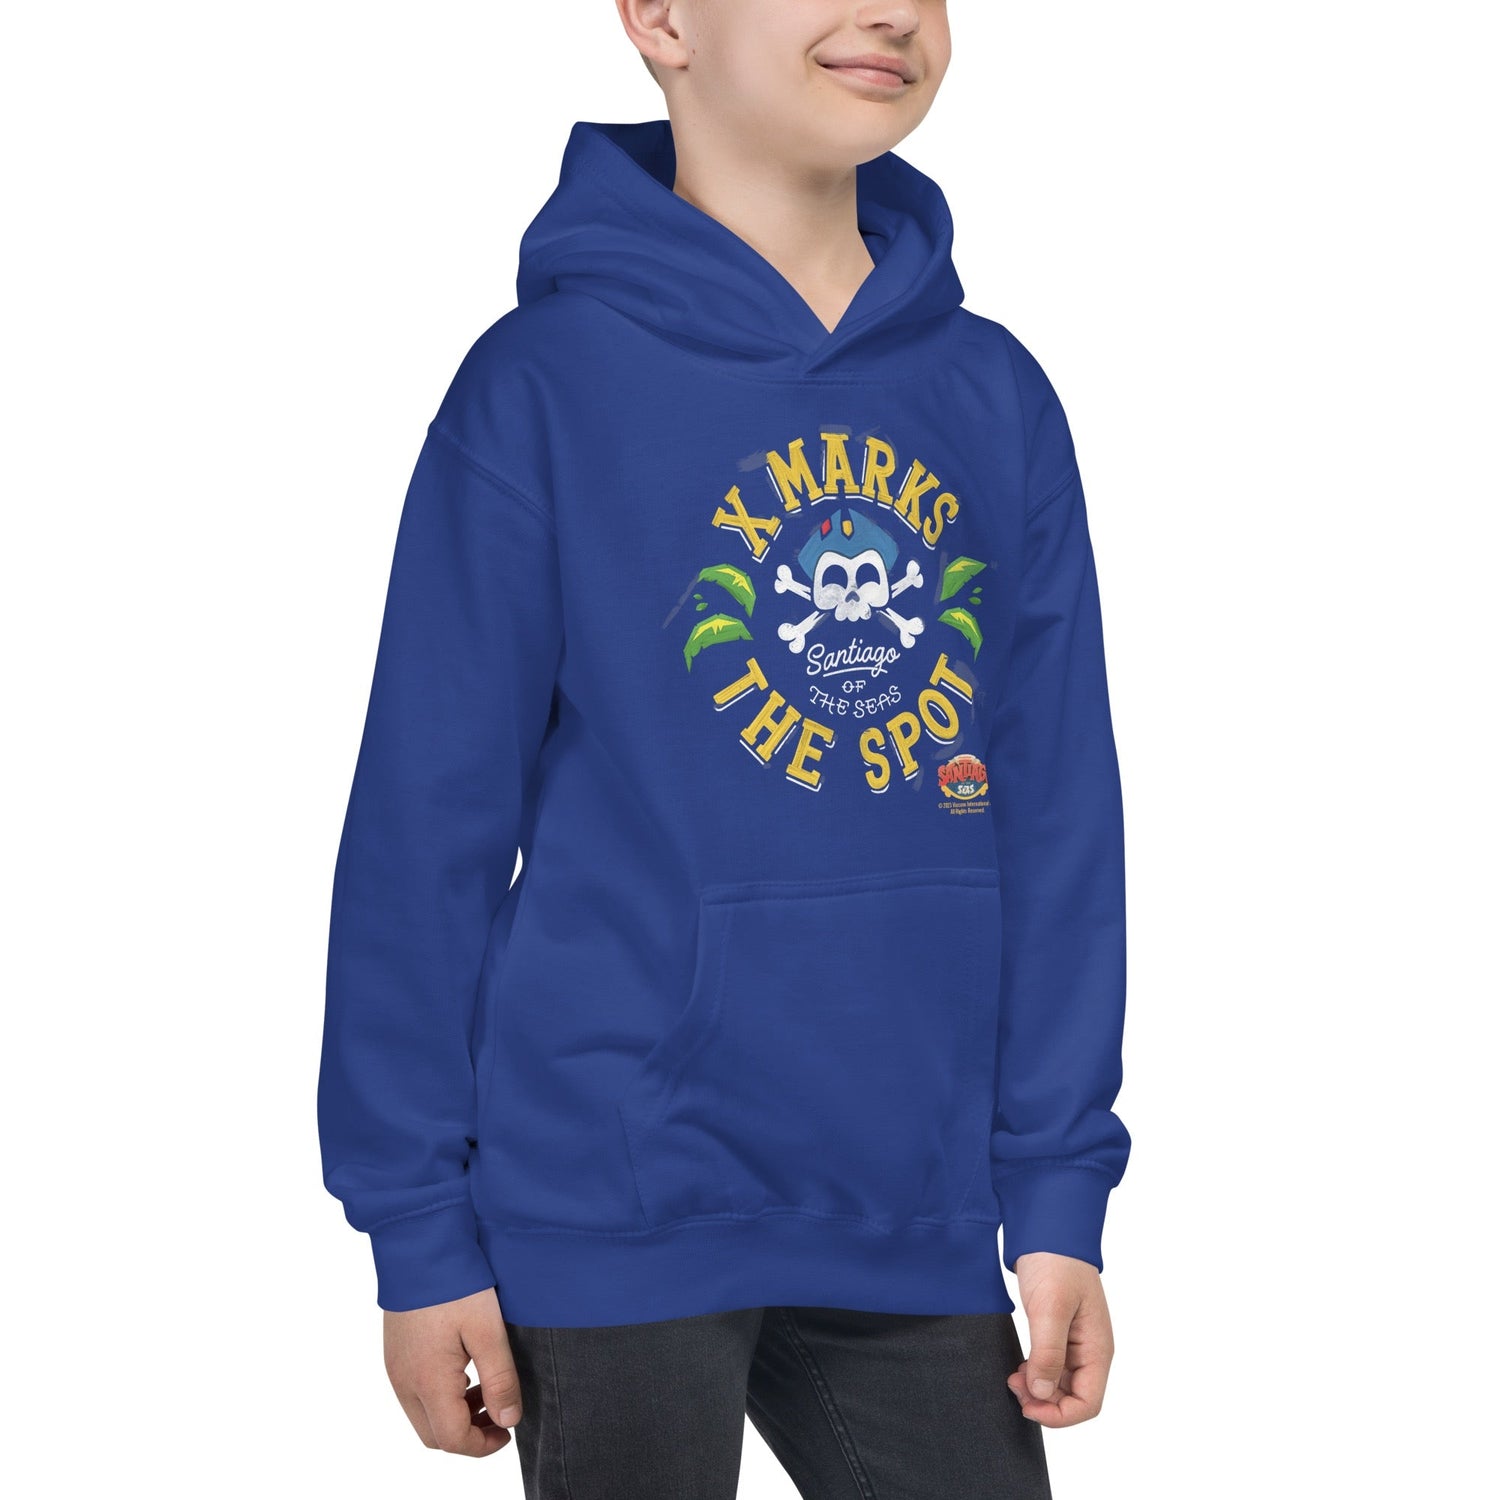 Santiago of the Seas X Marks The Spot Youth Hooded Sweatshirt - Paramount Shop